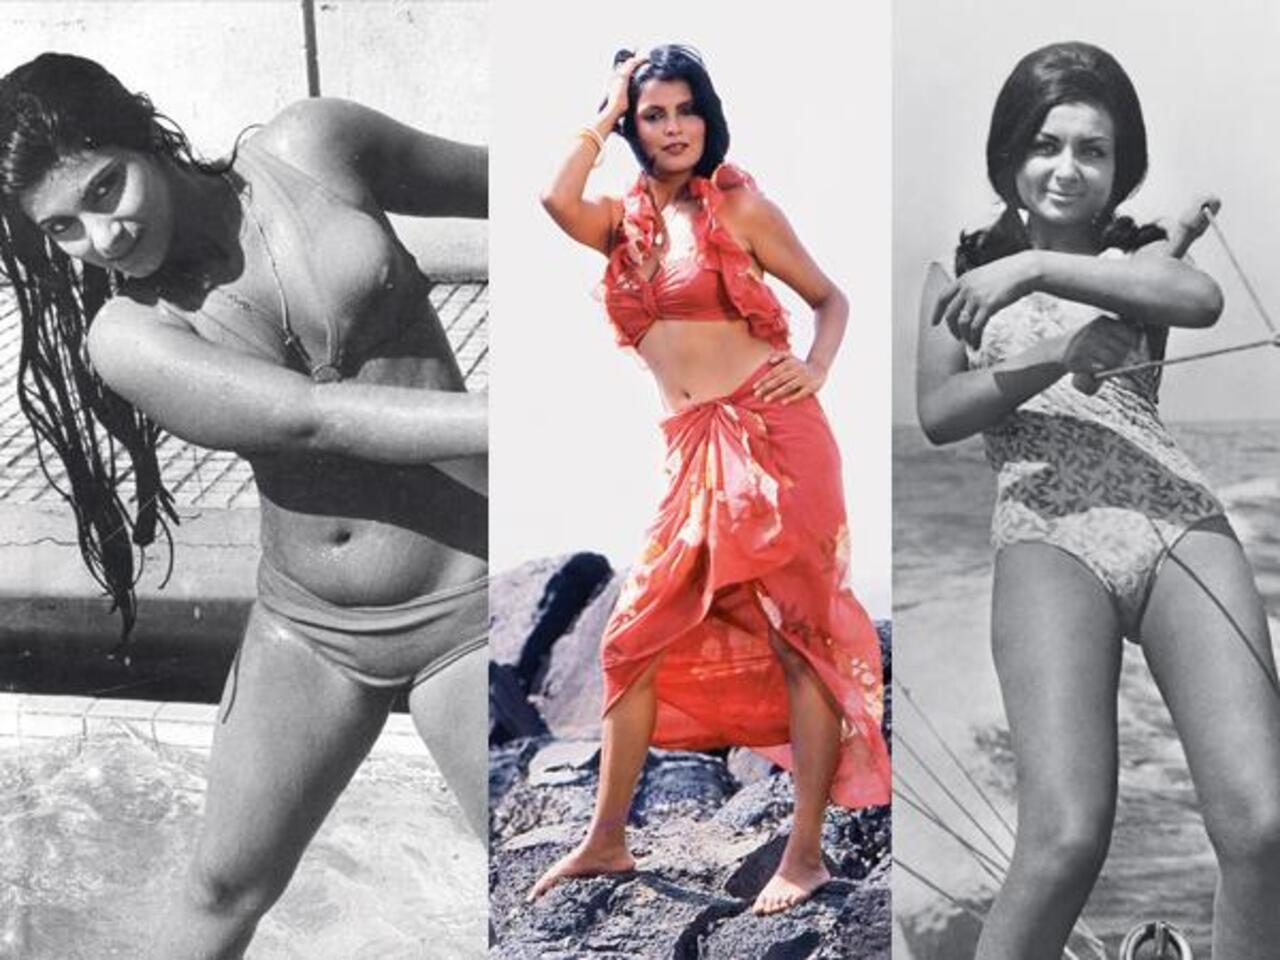 Zeenat Aman introduced the iconic retro hippie aesthetic to Bollywood, setting a new trend. Meanwhile, actresses like Sharmila Tagore and Dimple Kapadia captivated audiences by confidently donning bikinis on screen, showcasing a blend of boldness and allure that was emblematic of the changing fashion landscape of the era. They received equal parts backlash and admiration for introducing a bold intervention in the then-fashion trends.